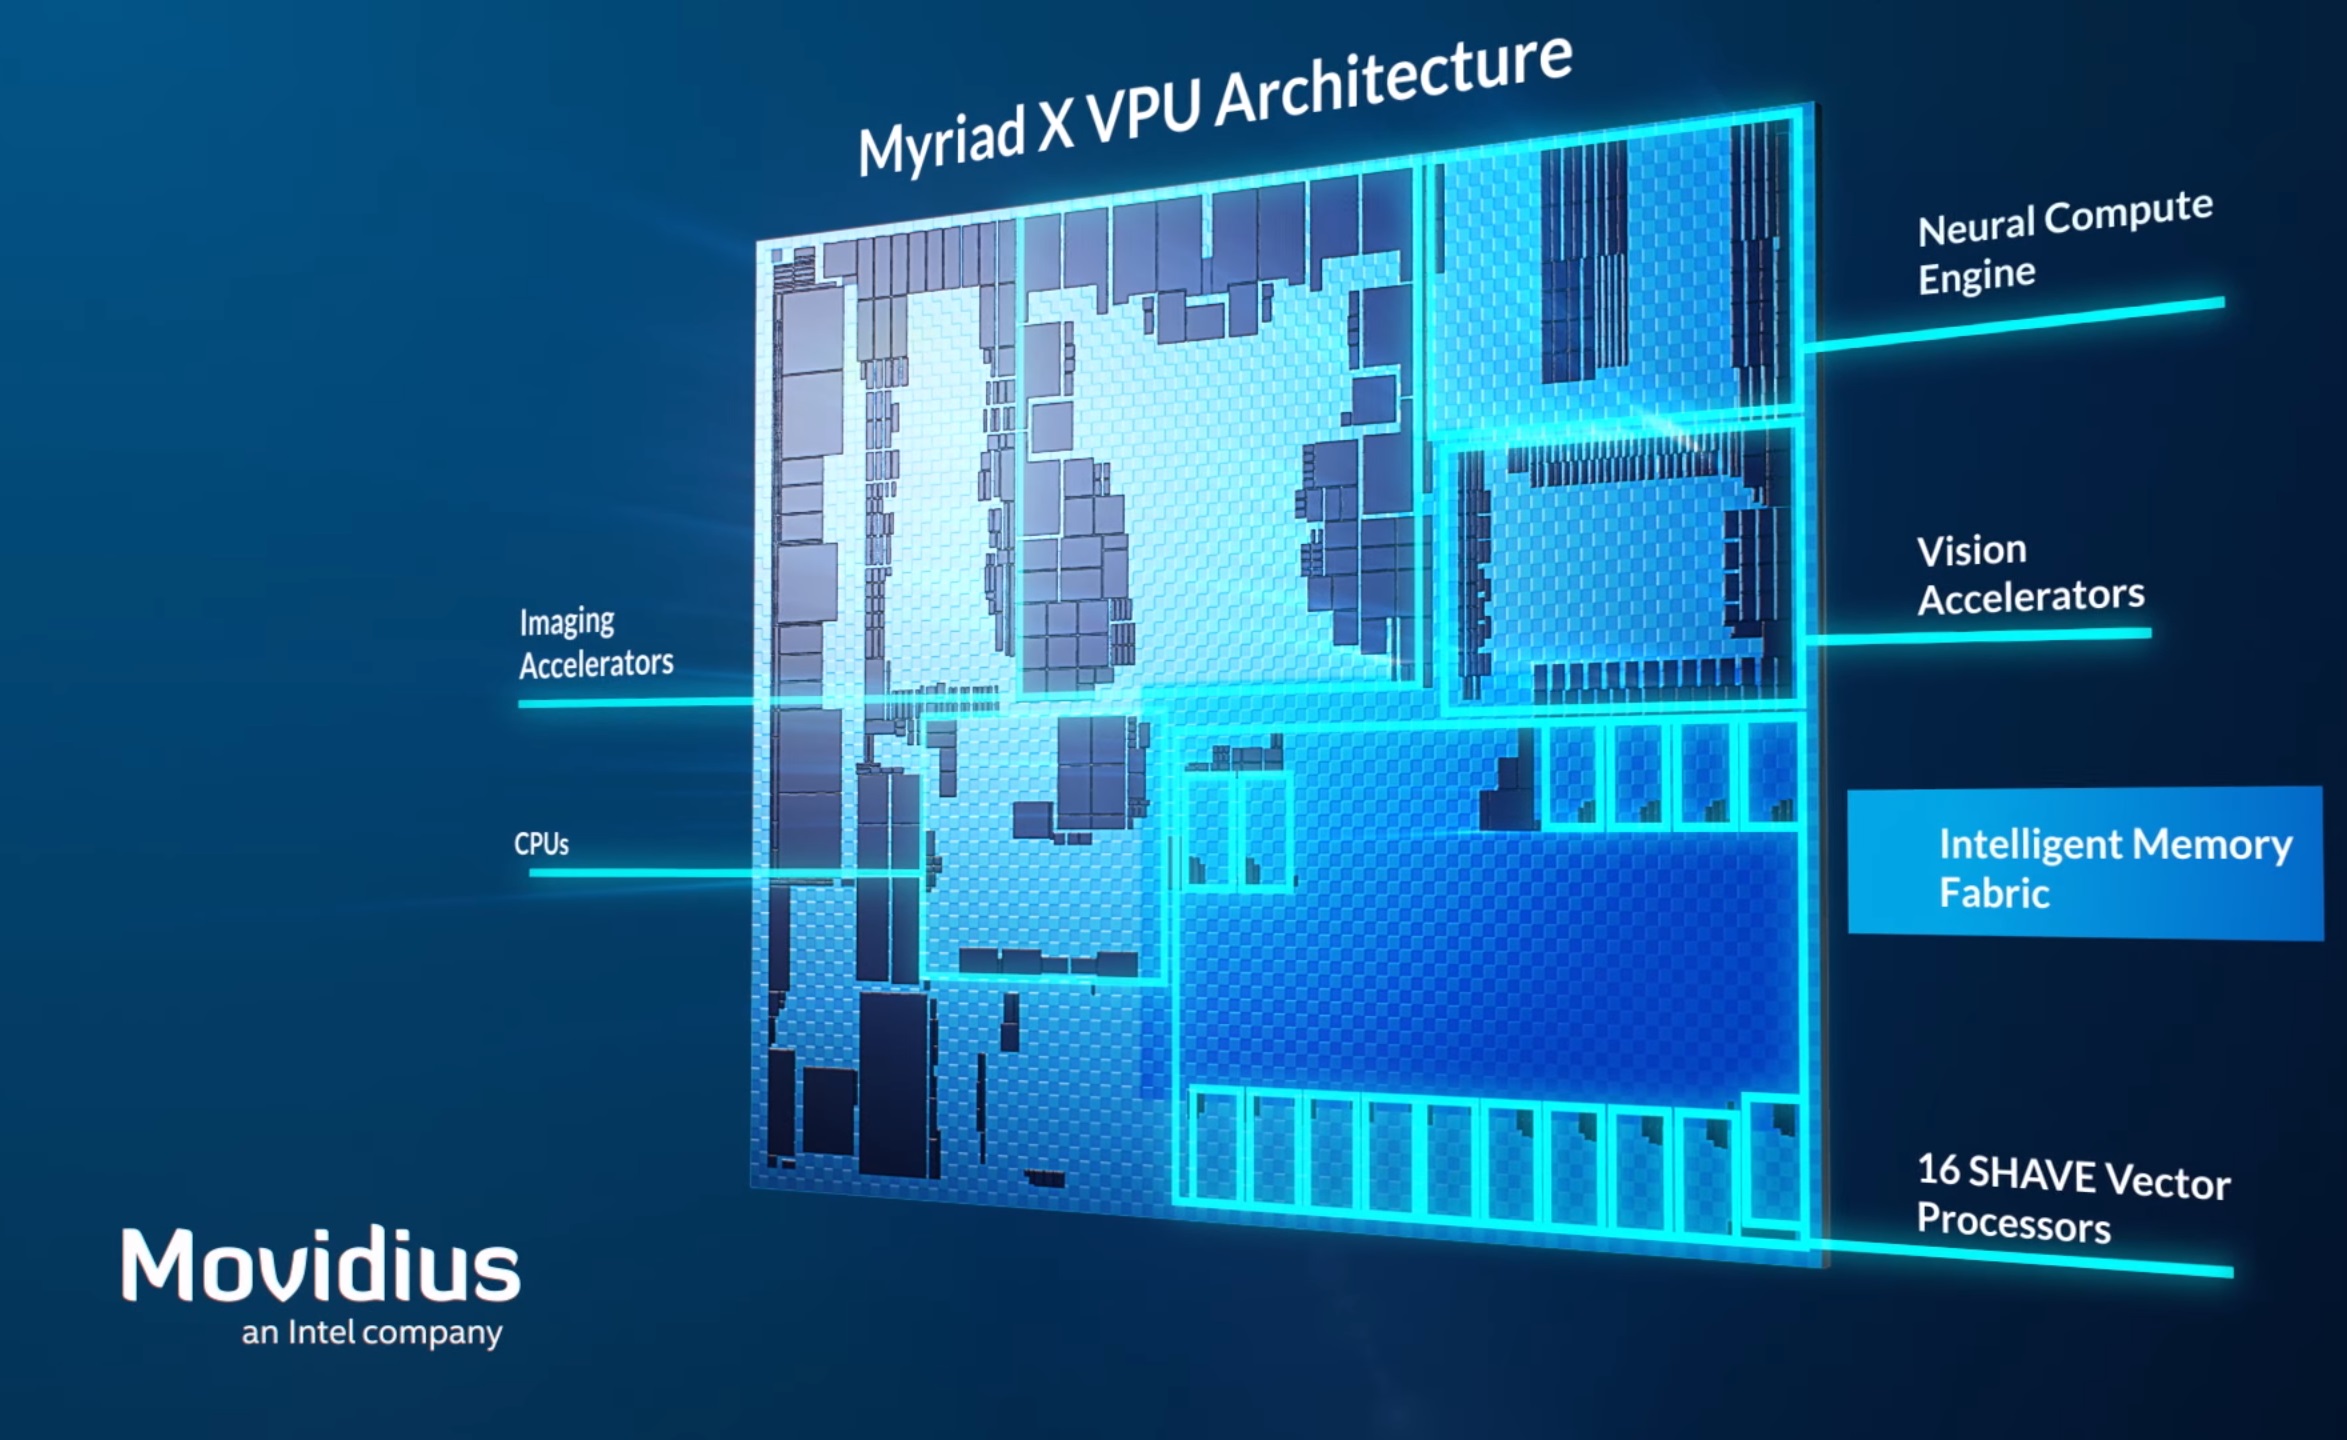 The VPU in the Intel Movidius enables computer vision applications to be processed in the silicon